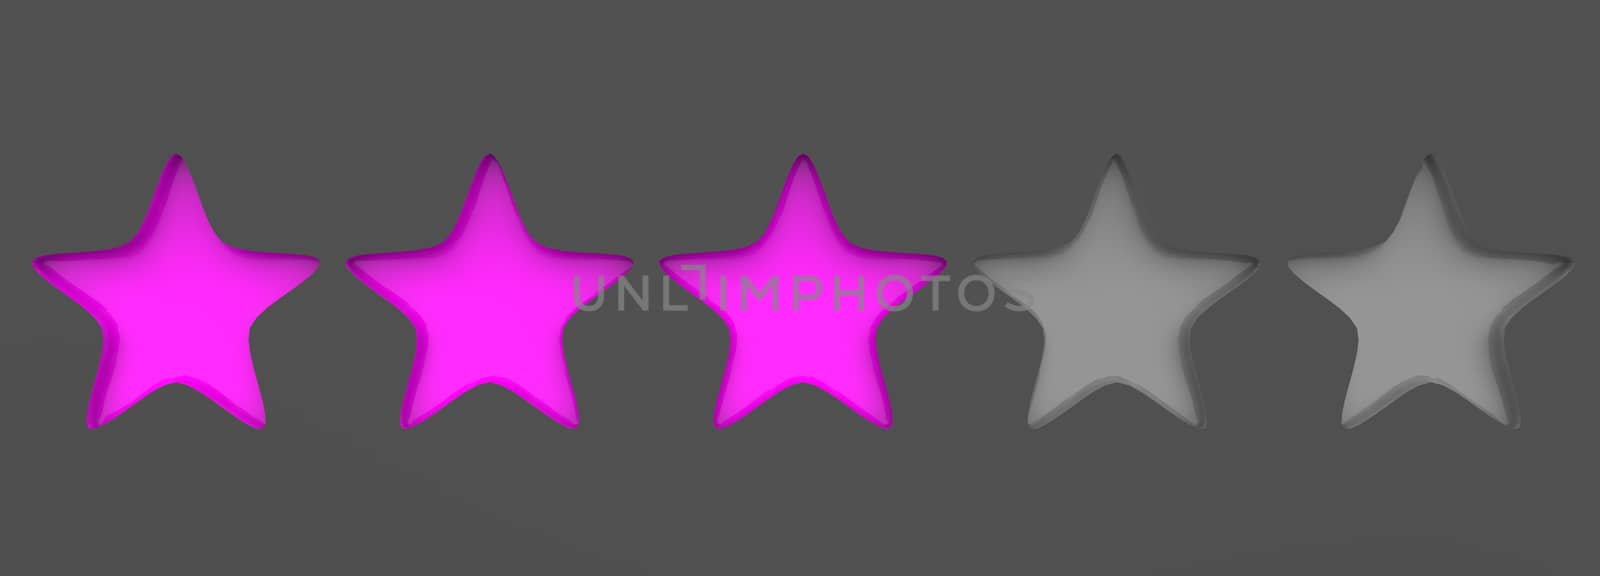 3d three purple star on color background. Render and illustration of golden star for premium review by Andreajk3